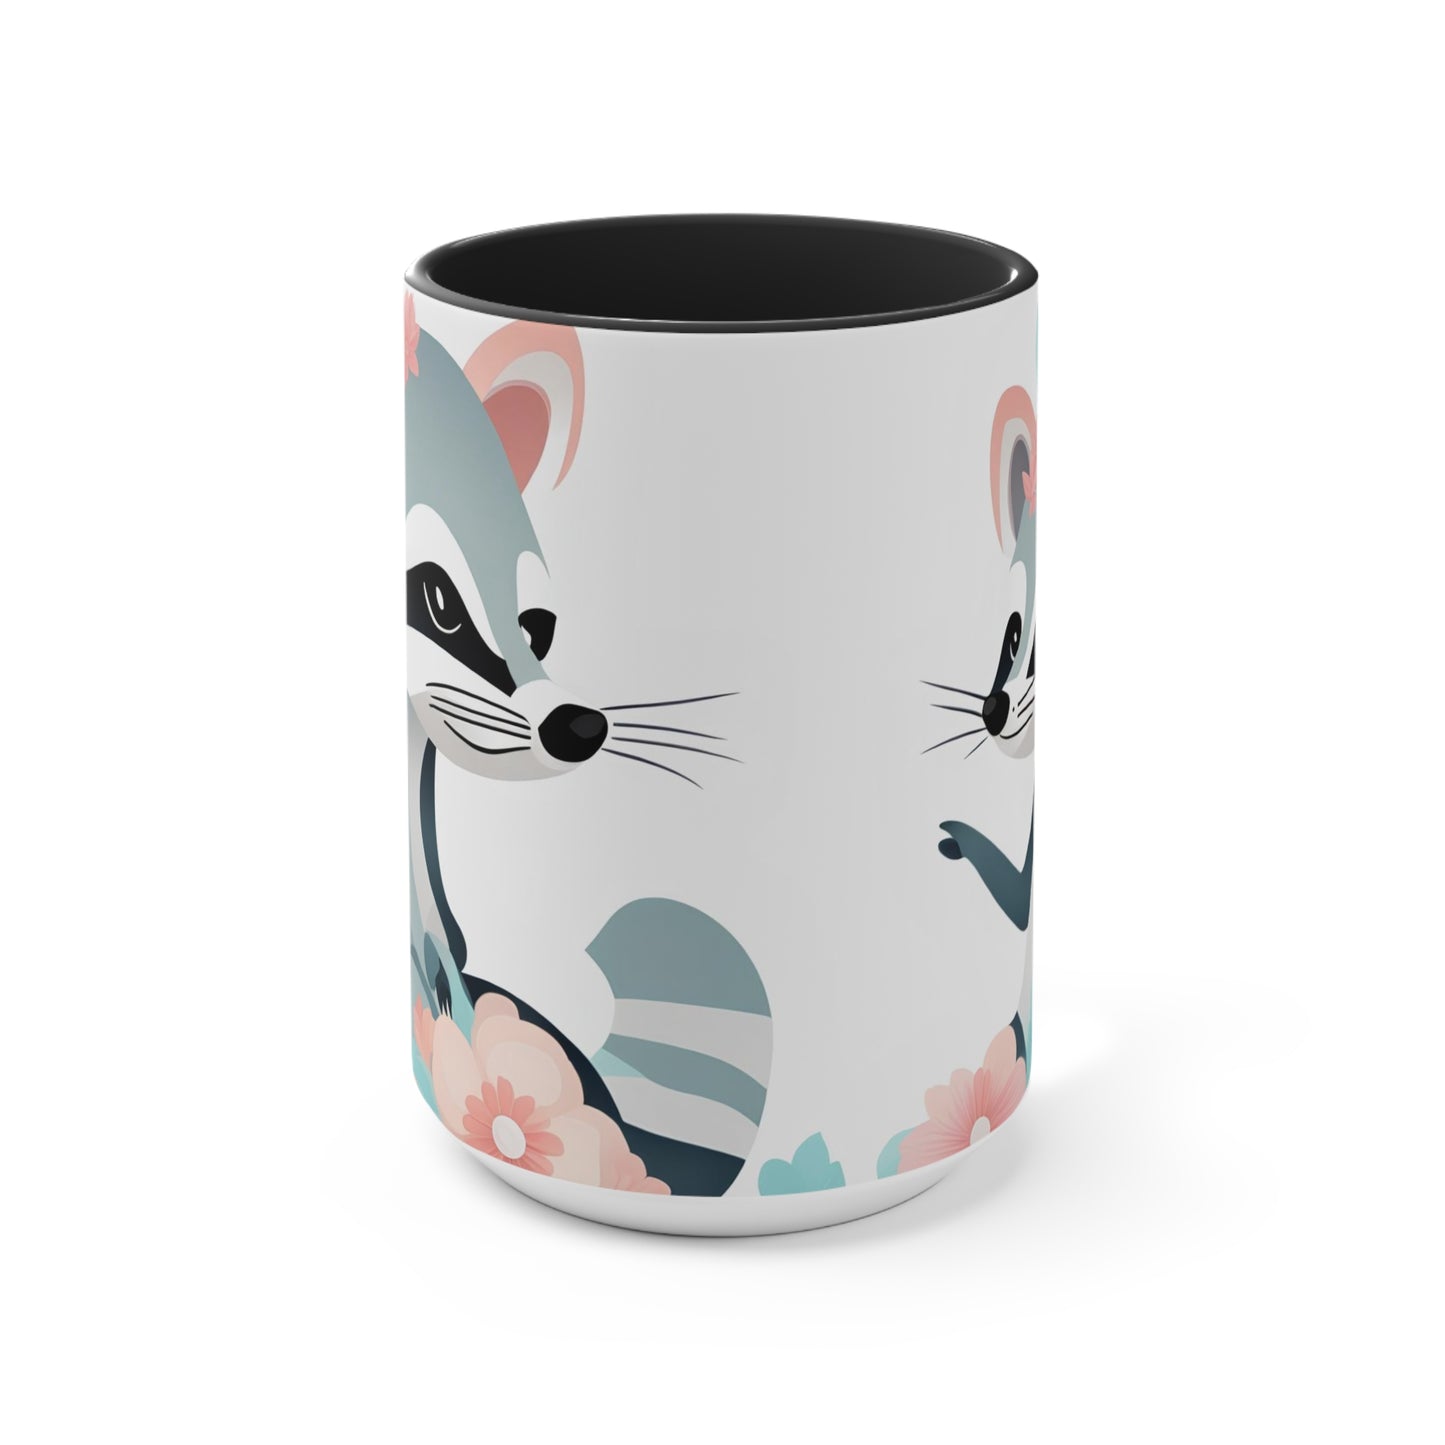 Two Raccoons with Pastel Flowers, Ceramic Mug - Perfect for Coffee, Tea, and More!